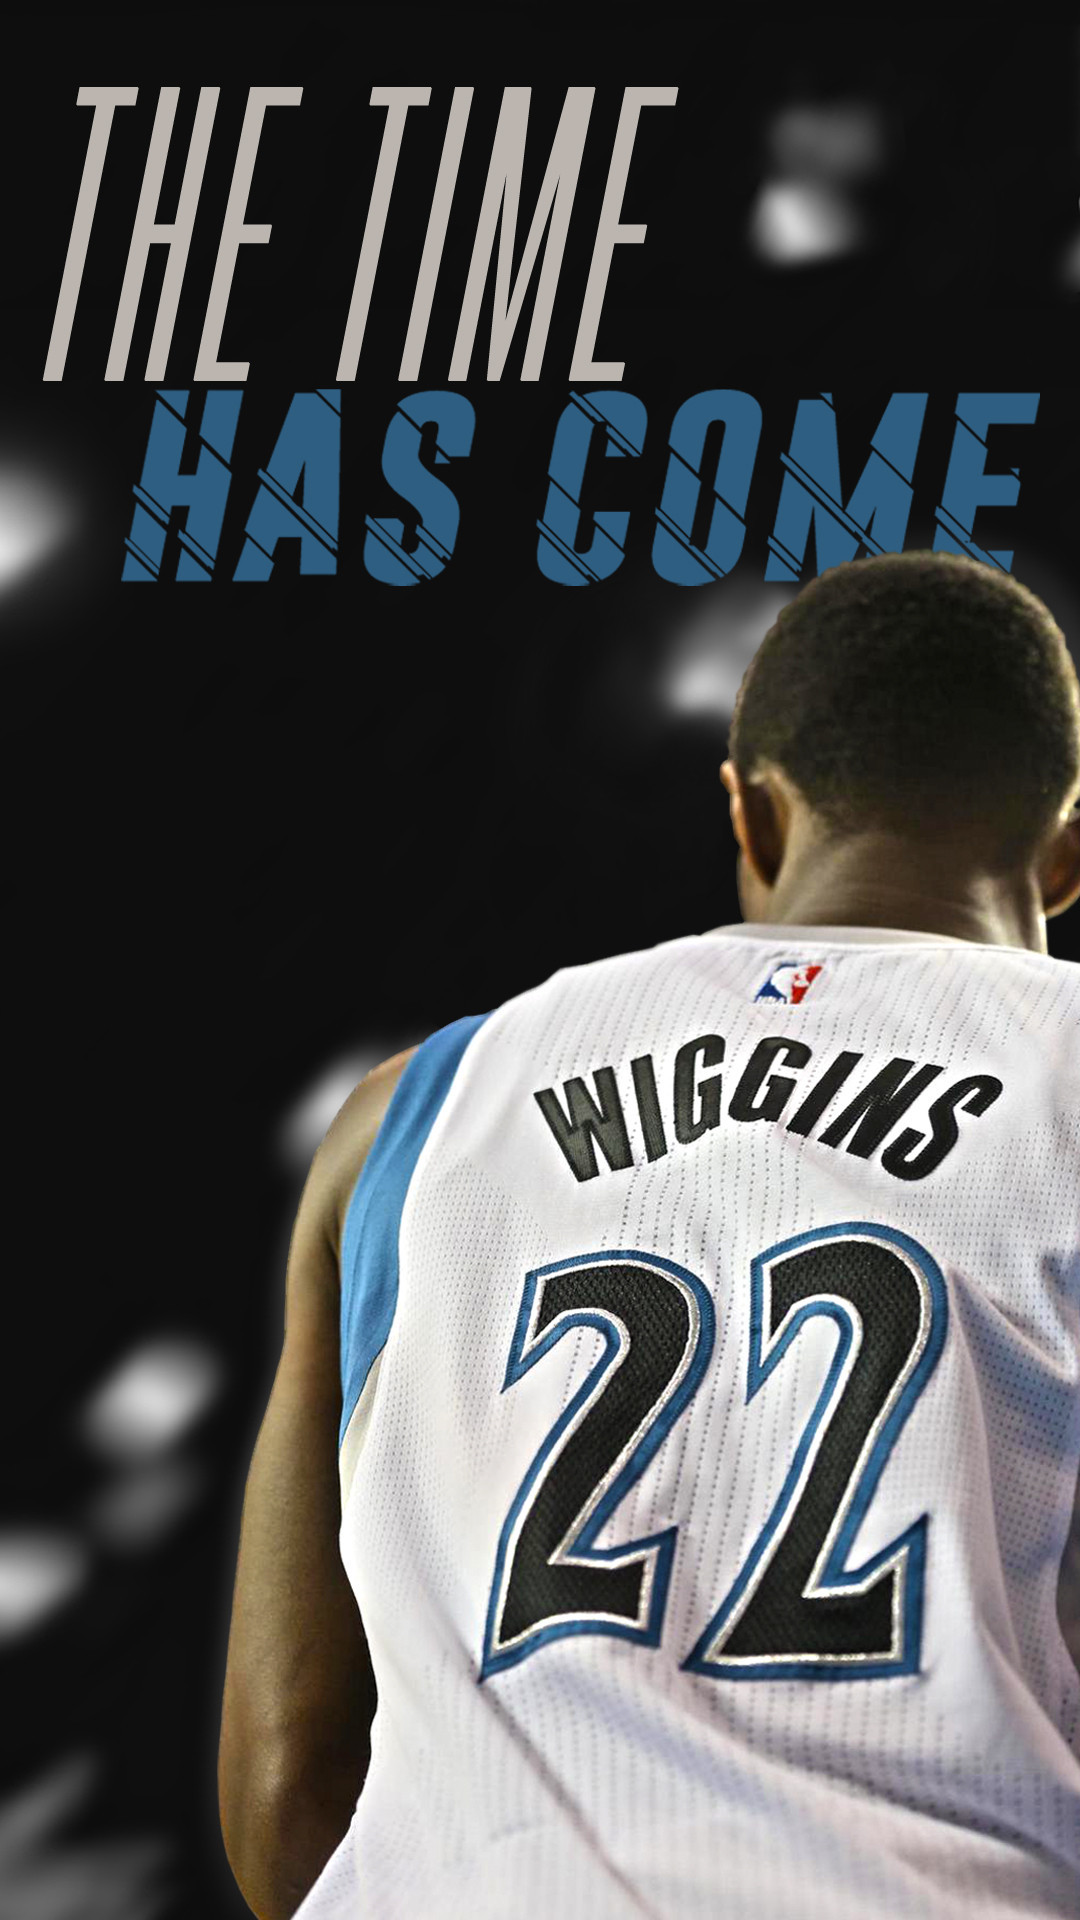 1080x1920 I made an Andrew Wiggins phone wallpaper! Let me know what you think.